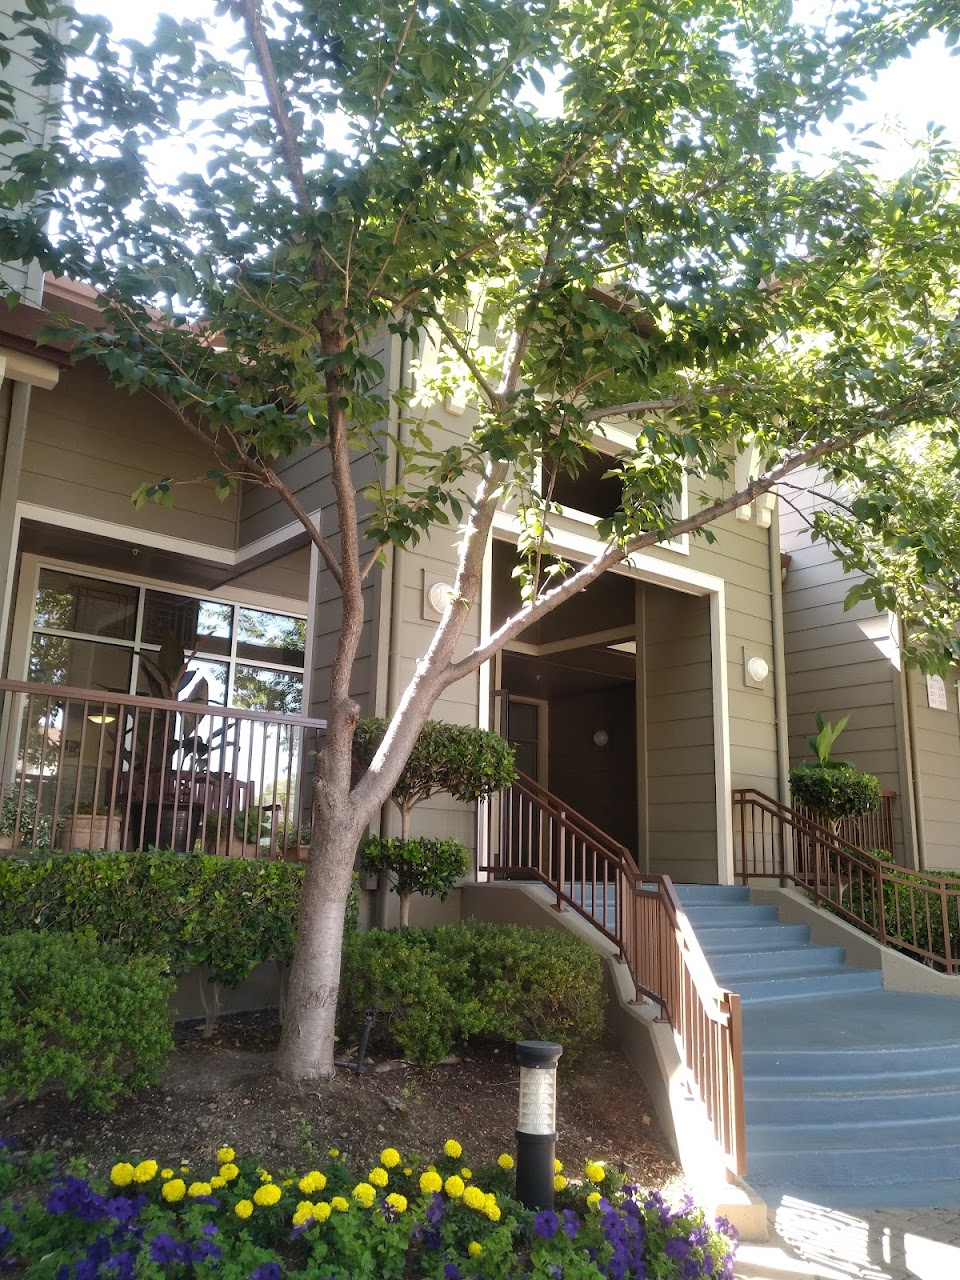 Photo of HOMESTEAD PARK. Affordable housing located at 1601 TENAKA PL SUNNYVALE, CA 94087